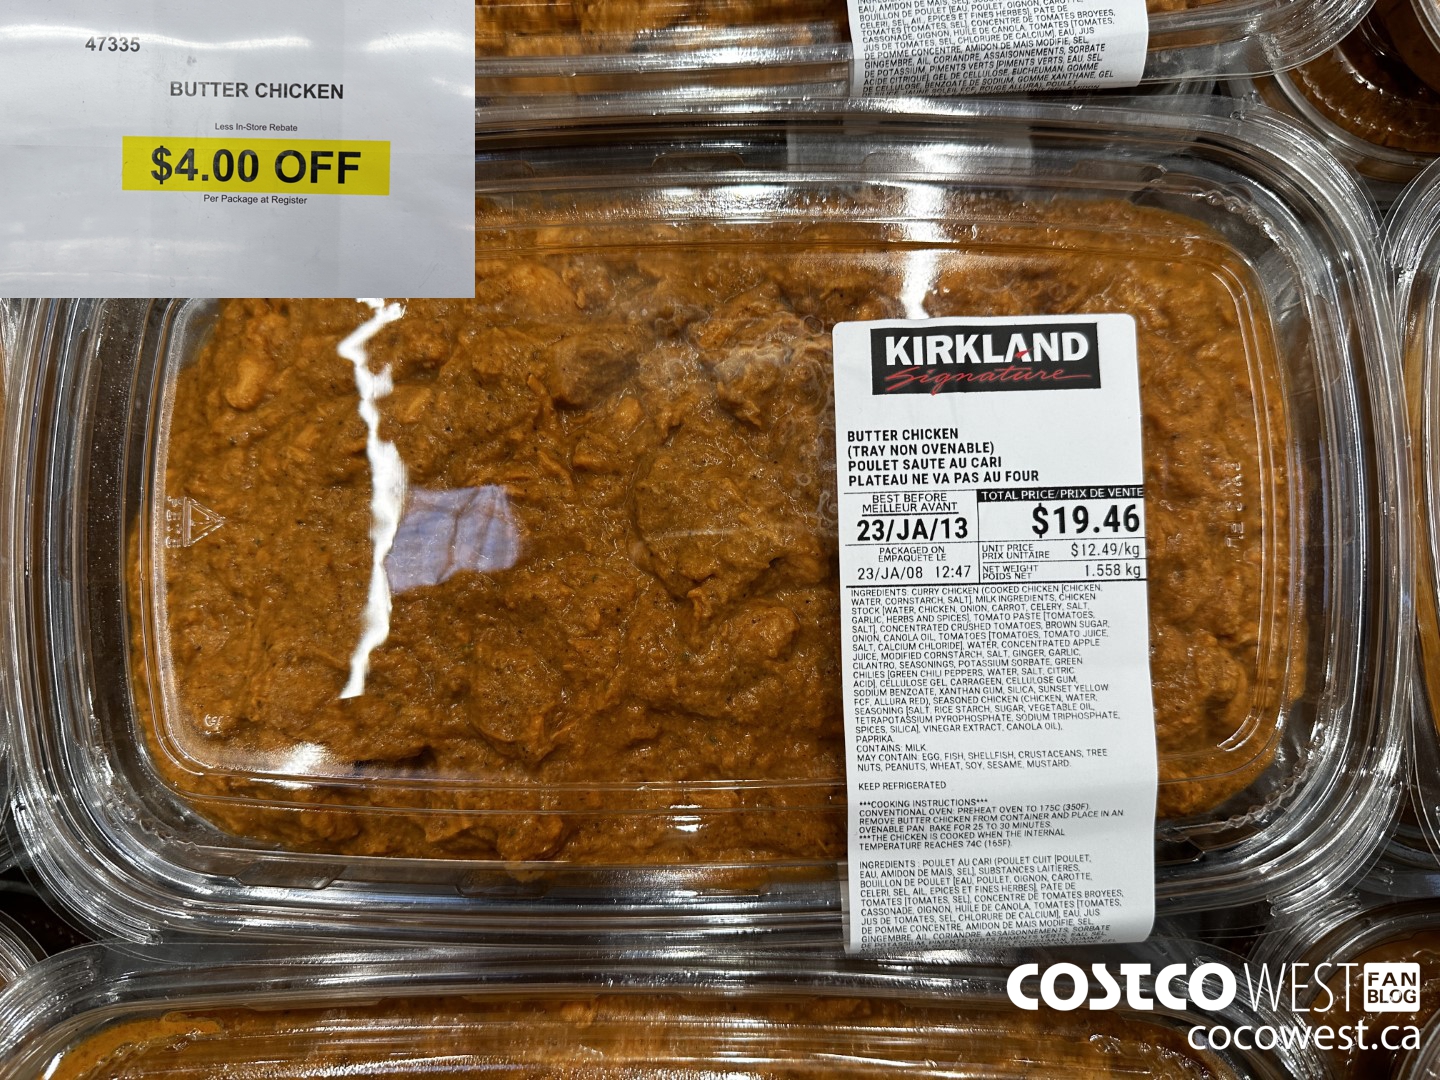 Costco Flyer & Costco Sale Items for Jan 9-15, 2023 for BC, AB, MB, SK -  Costco West Fan Blog